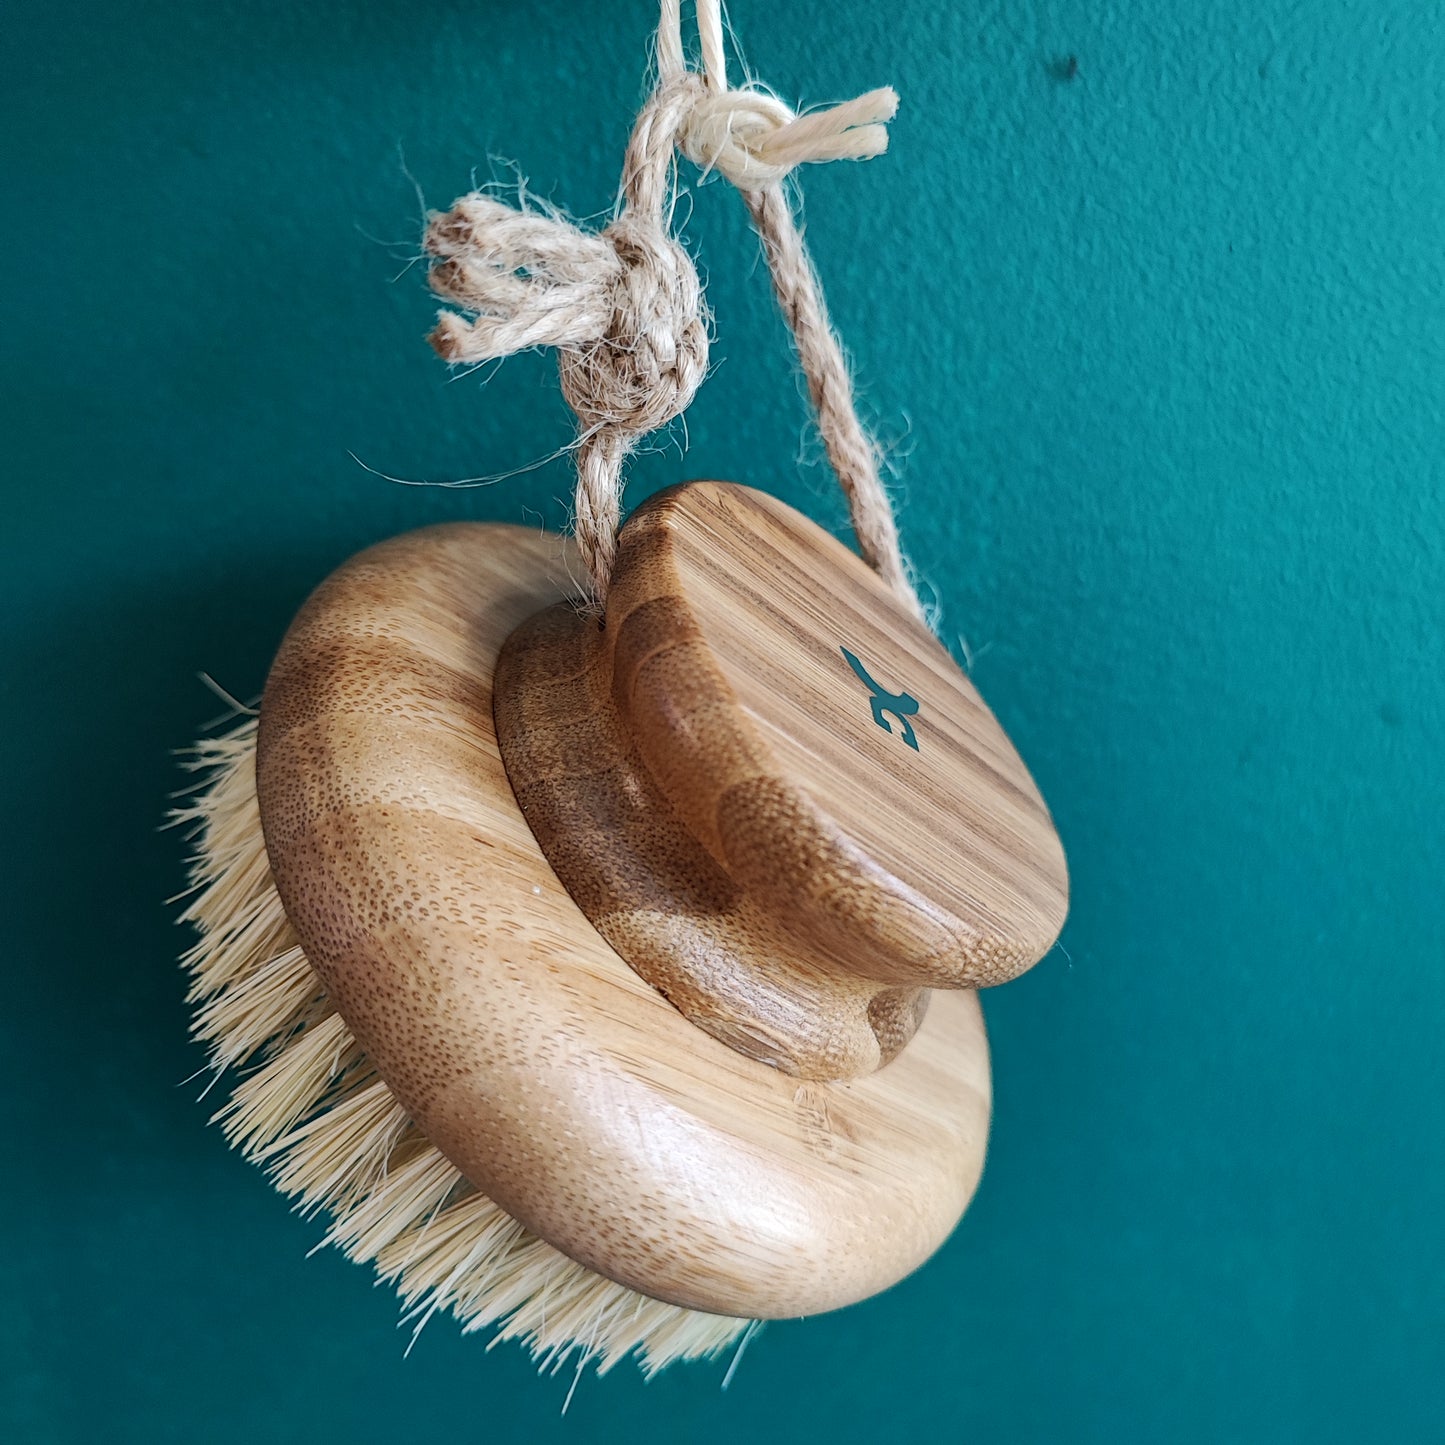 Dry Brushes (wooden) for Massage